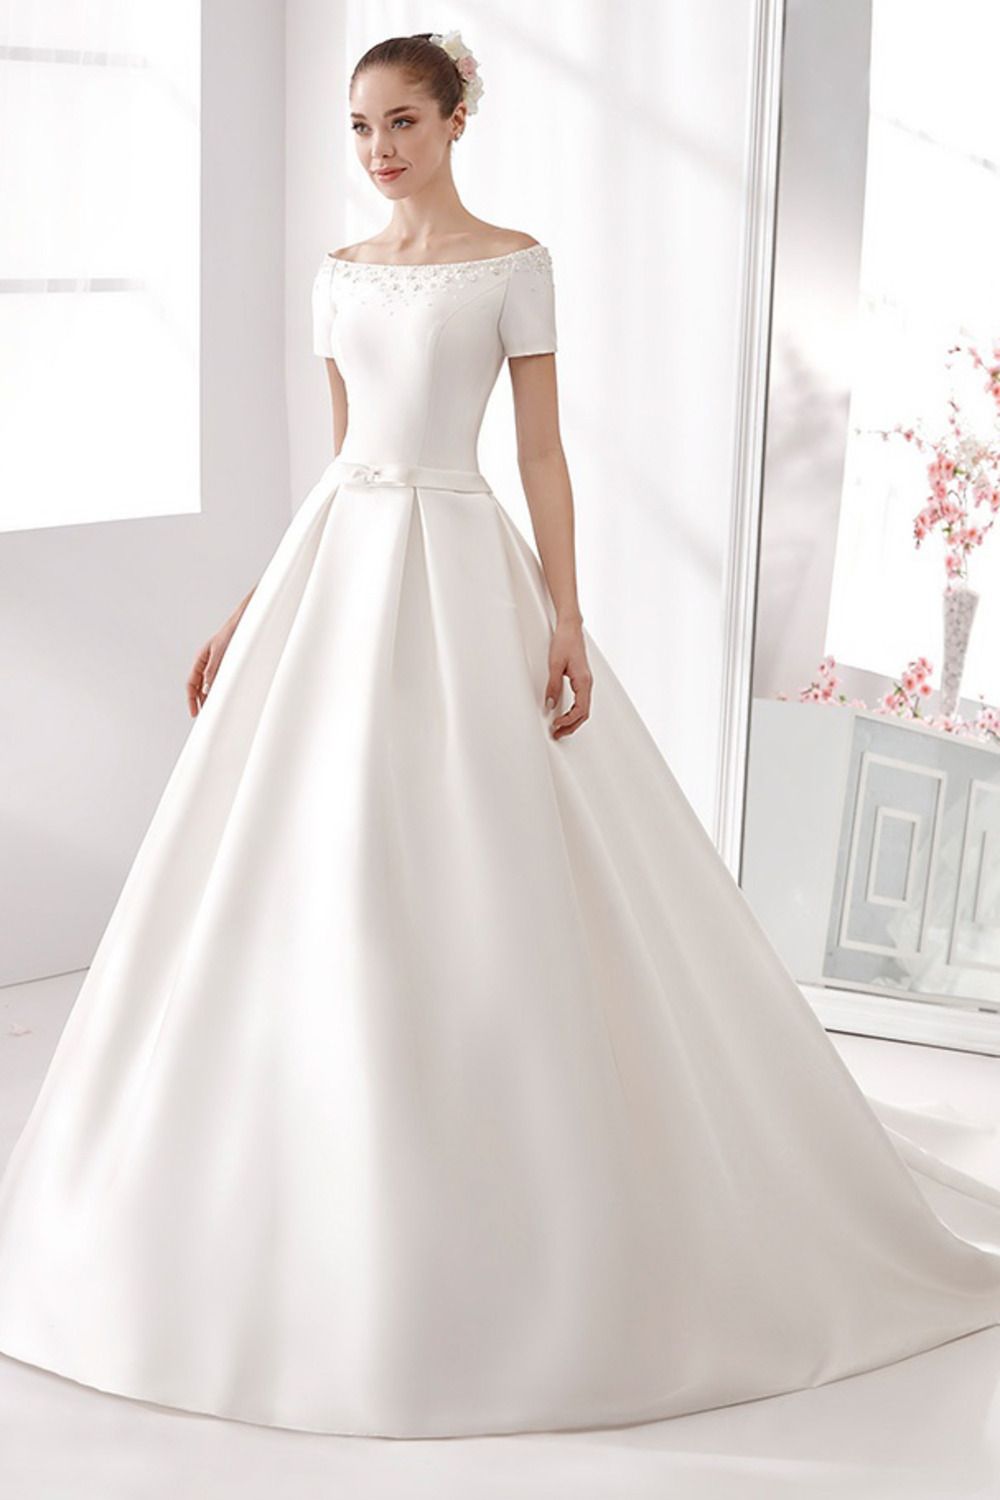 The Gatia Beauty gown